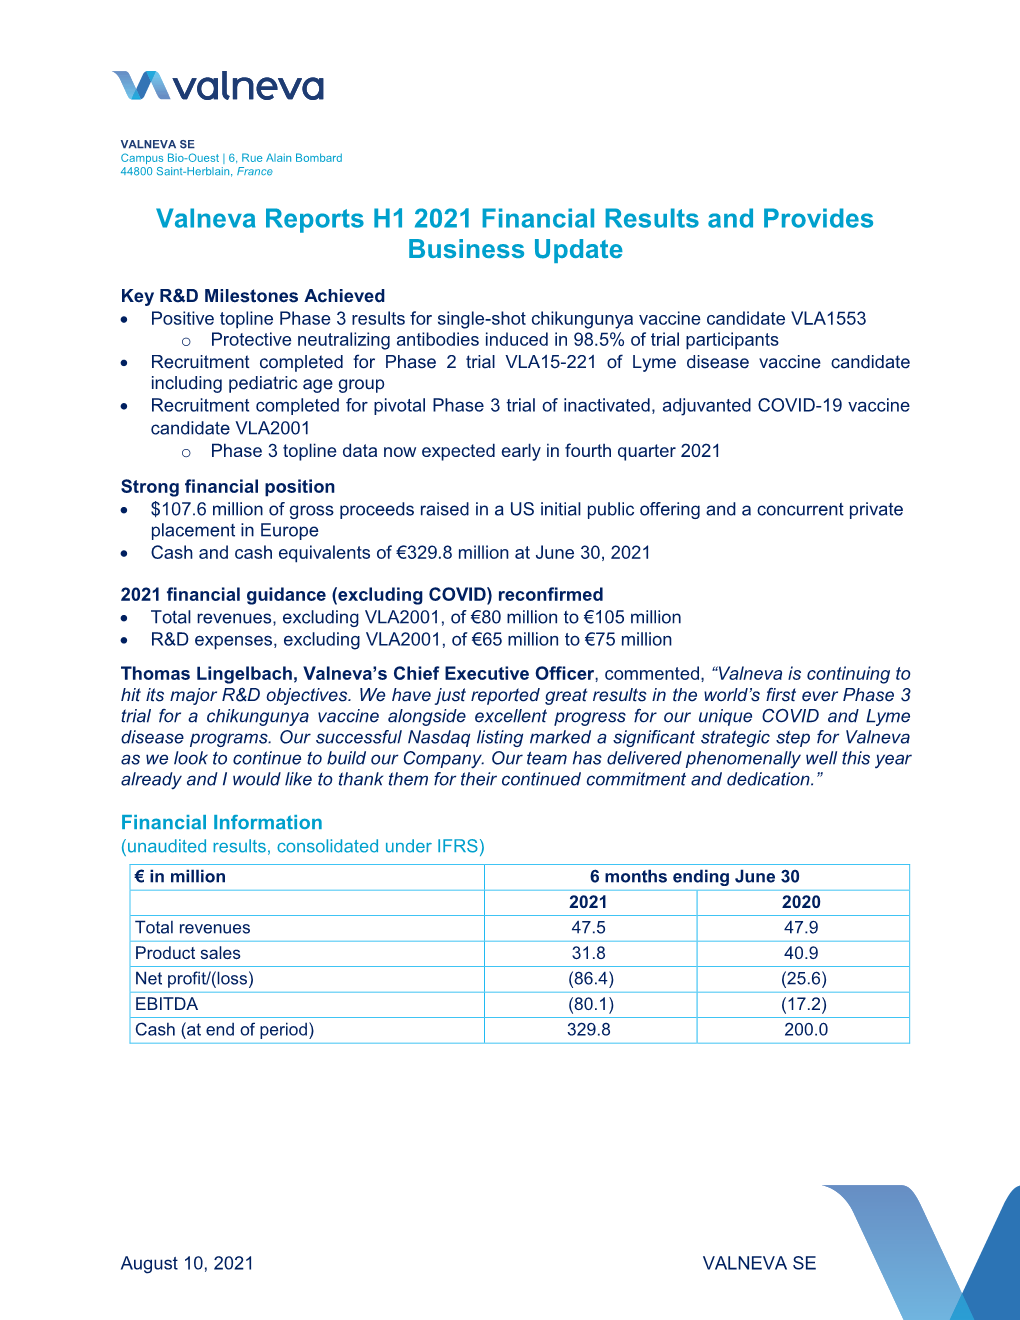 Valneva Reports H1 2021 Financial Results and Provides Business Update